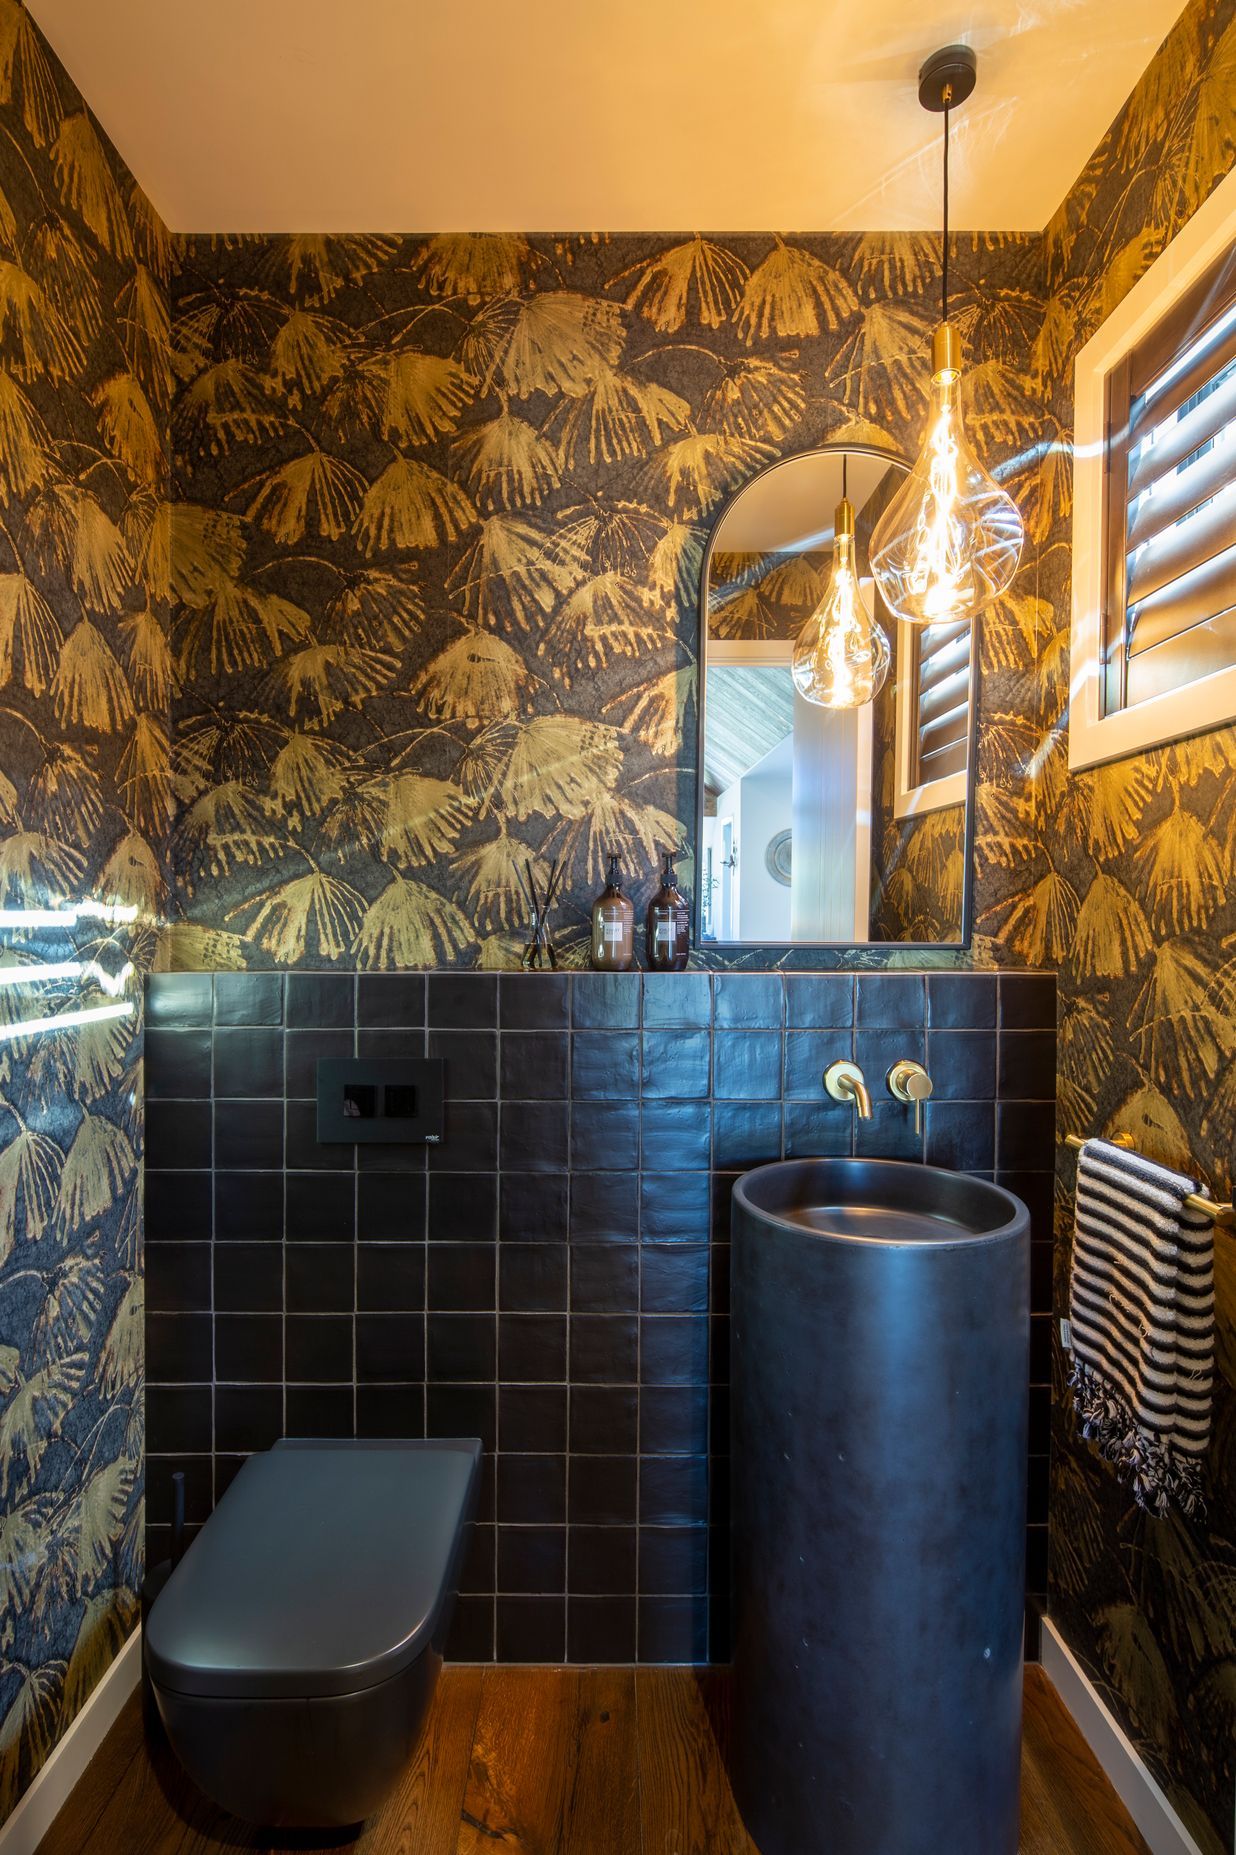 The powder room is furnished with a striking Como concrete floor basin in 'Midnight' with a dash of decorativeness provided by the Iliad by Zoffany wallpaper. A Voronoi globe, by Tala, is reflected in the mirror.